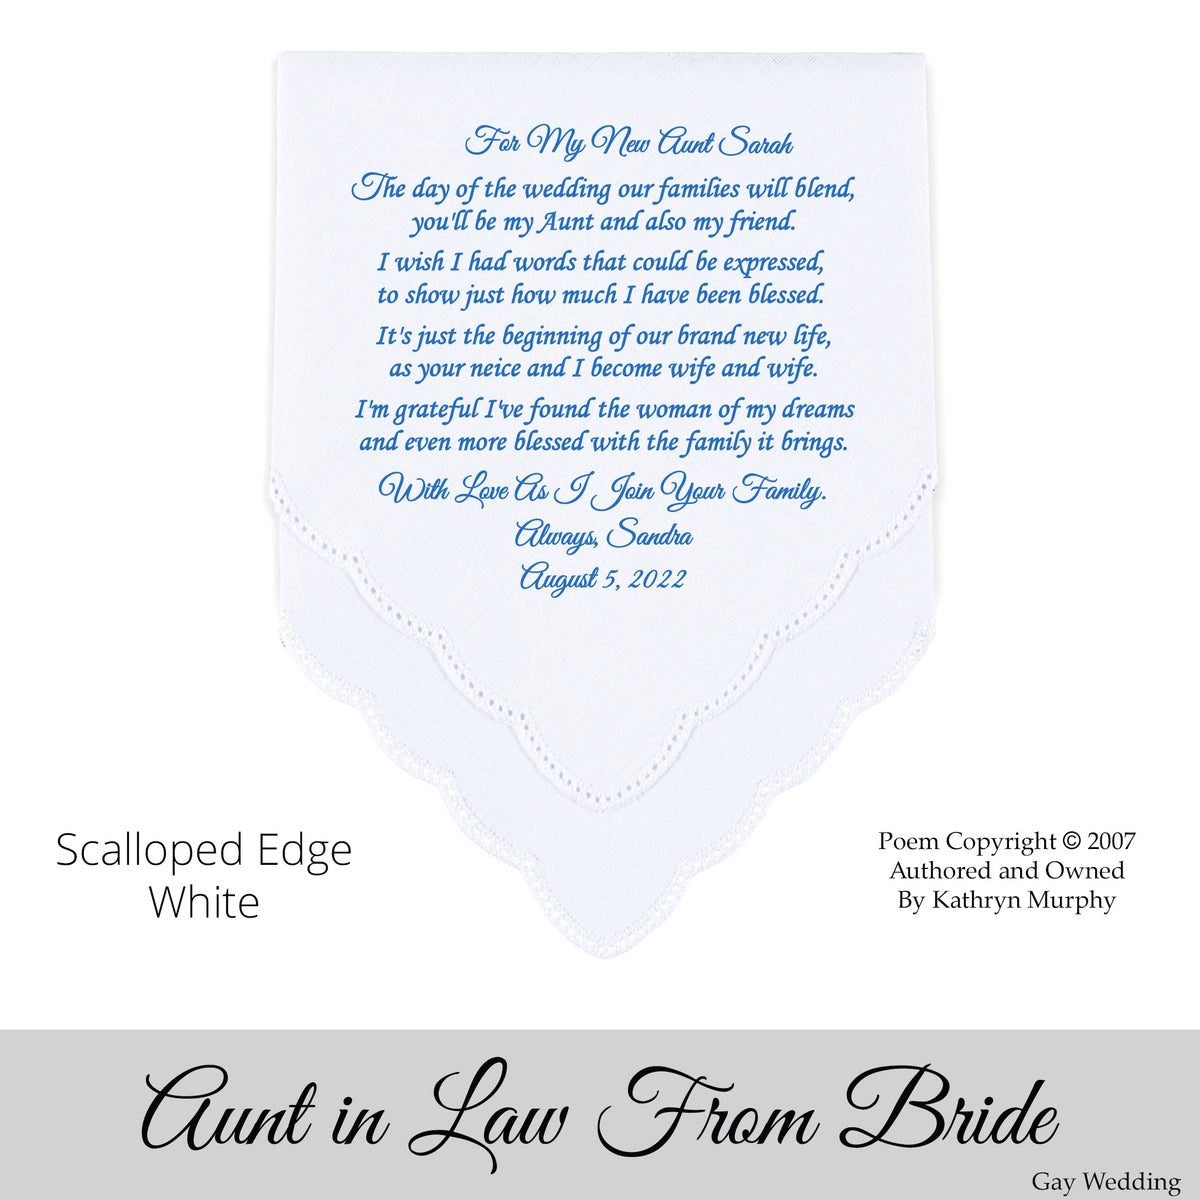 Gay Wedding Gift for the Aunt of the Bride poem printed wedding hankie